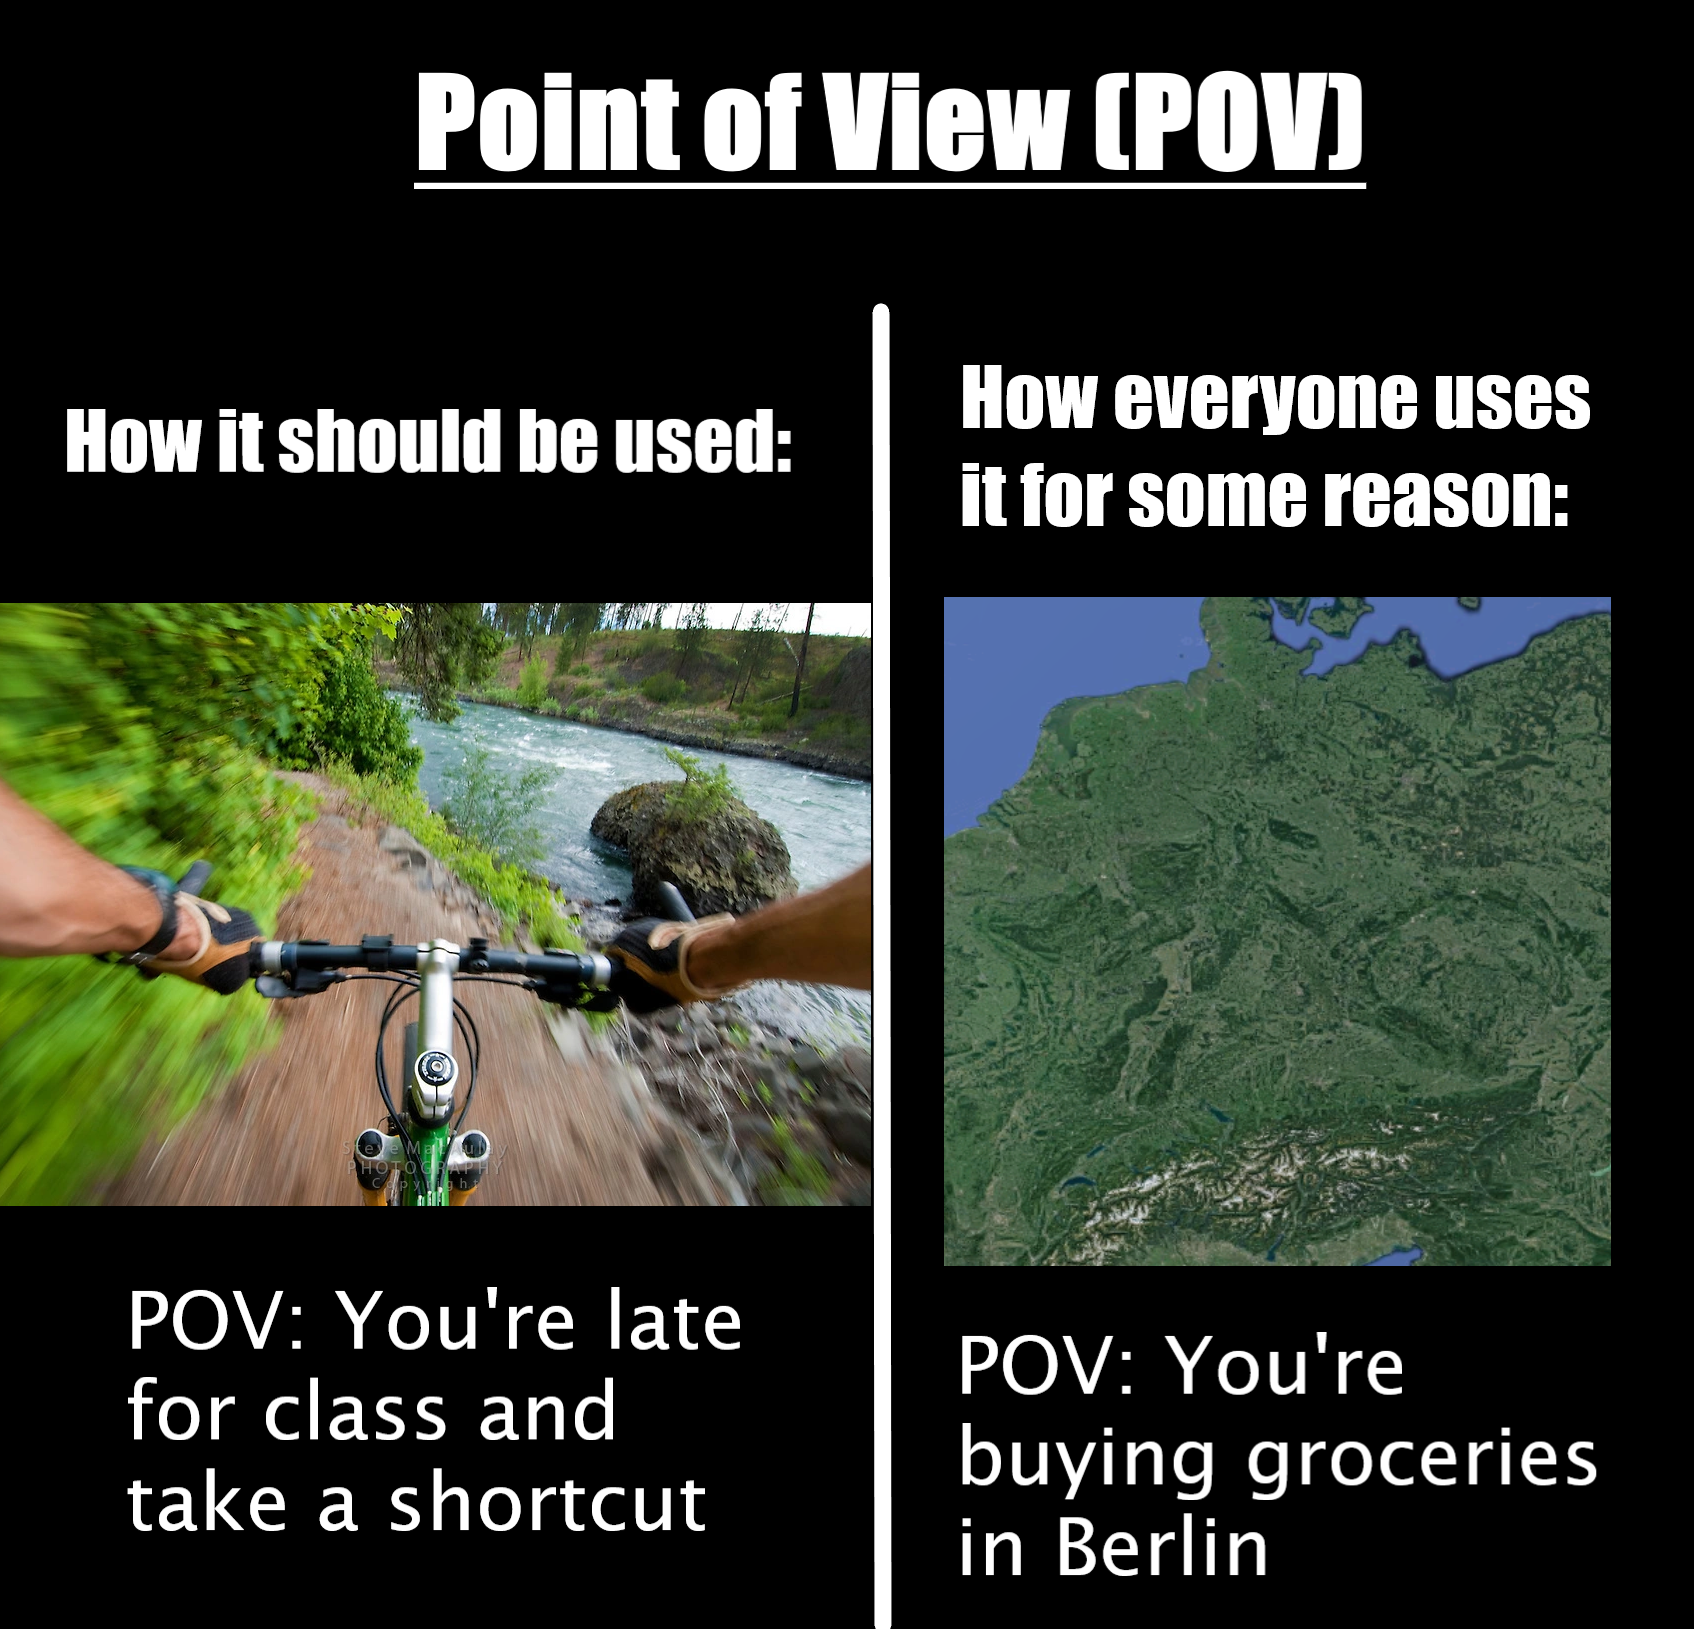 dank memes -  water resources - Point of View Pov How it should be used Pov You're late for class and take a shortcut How everyone uses it for some reason Pov You're buying groceries in Berlin